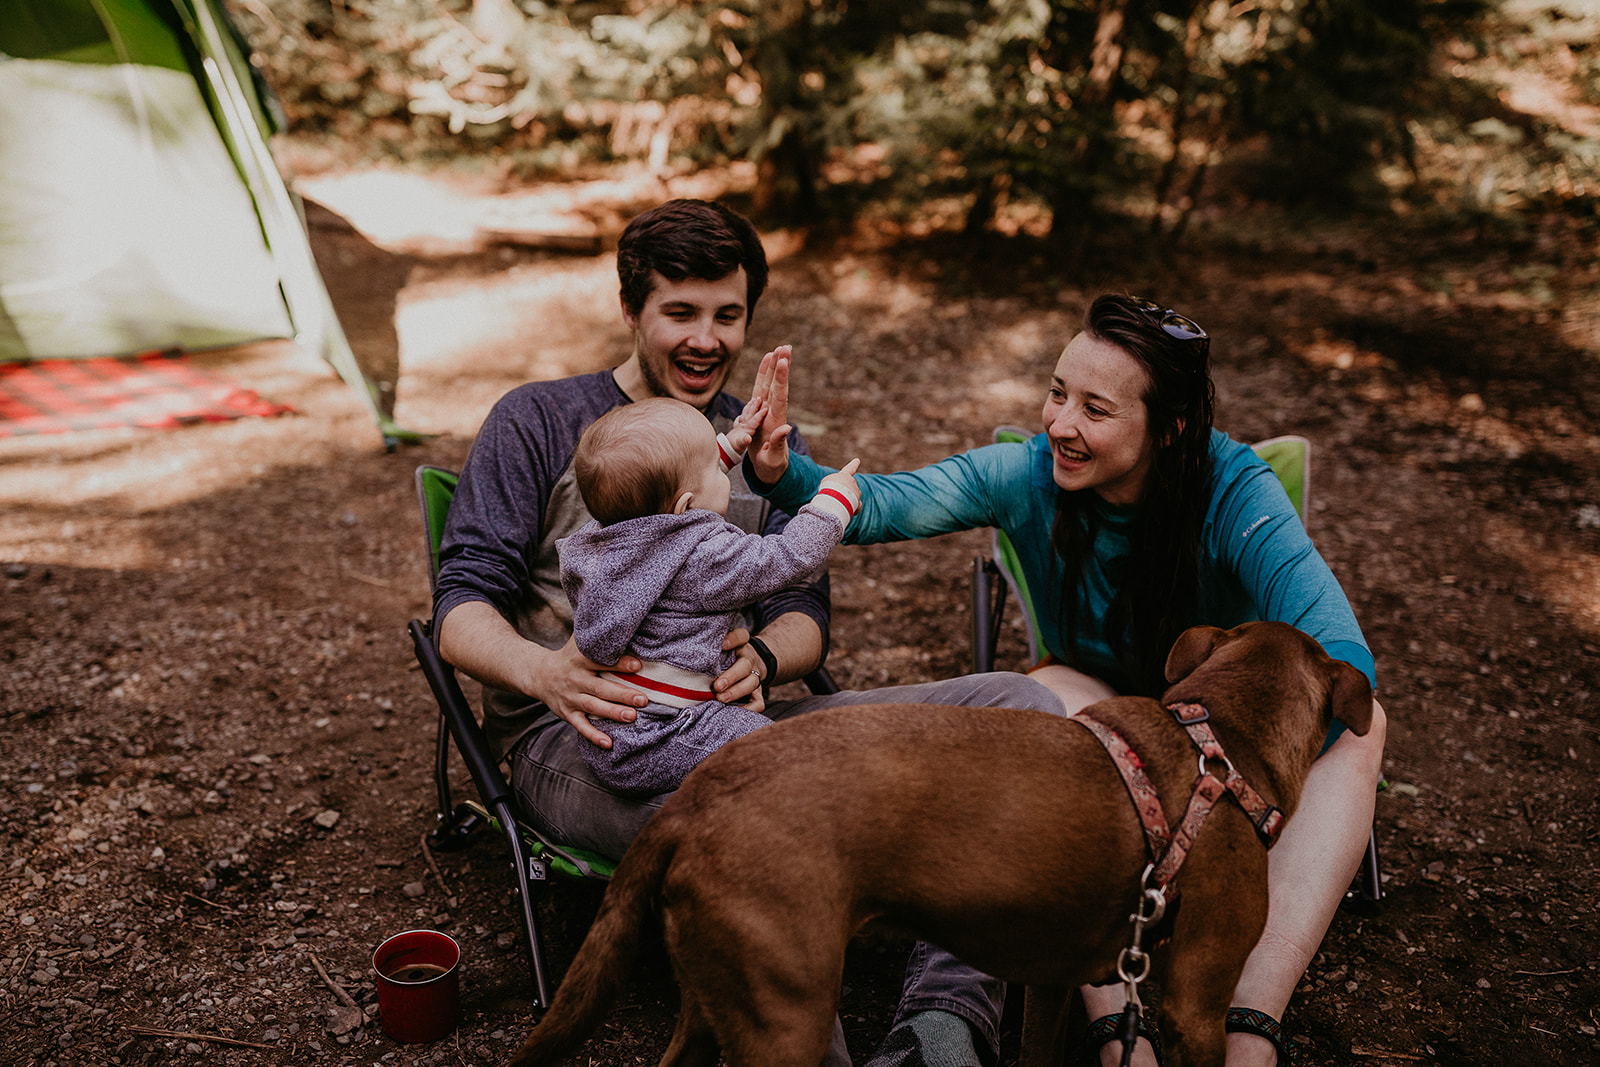 kachess-lake-camping-family-portraits-megan-gallagher-photography_(22_of_335).jpg